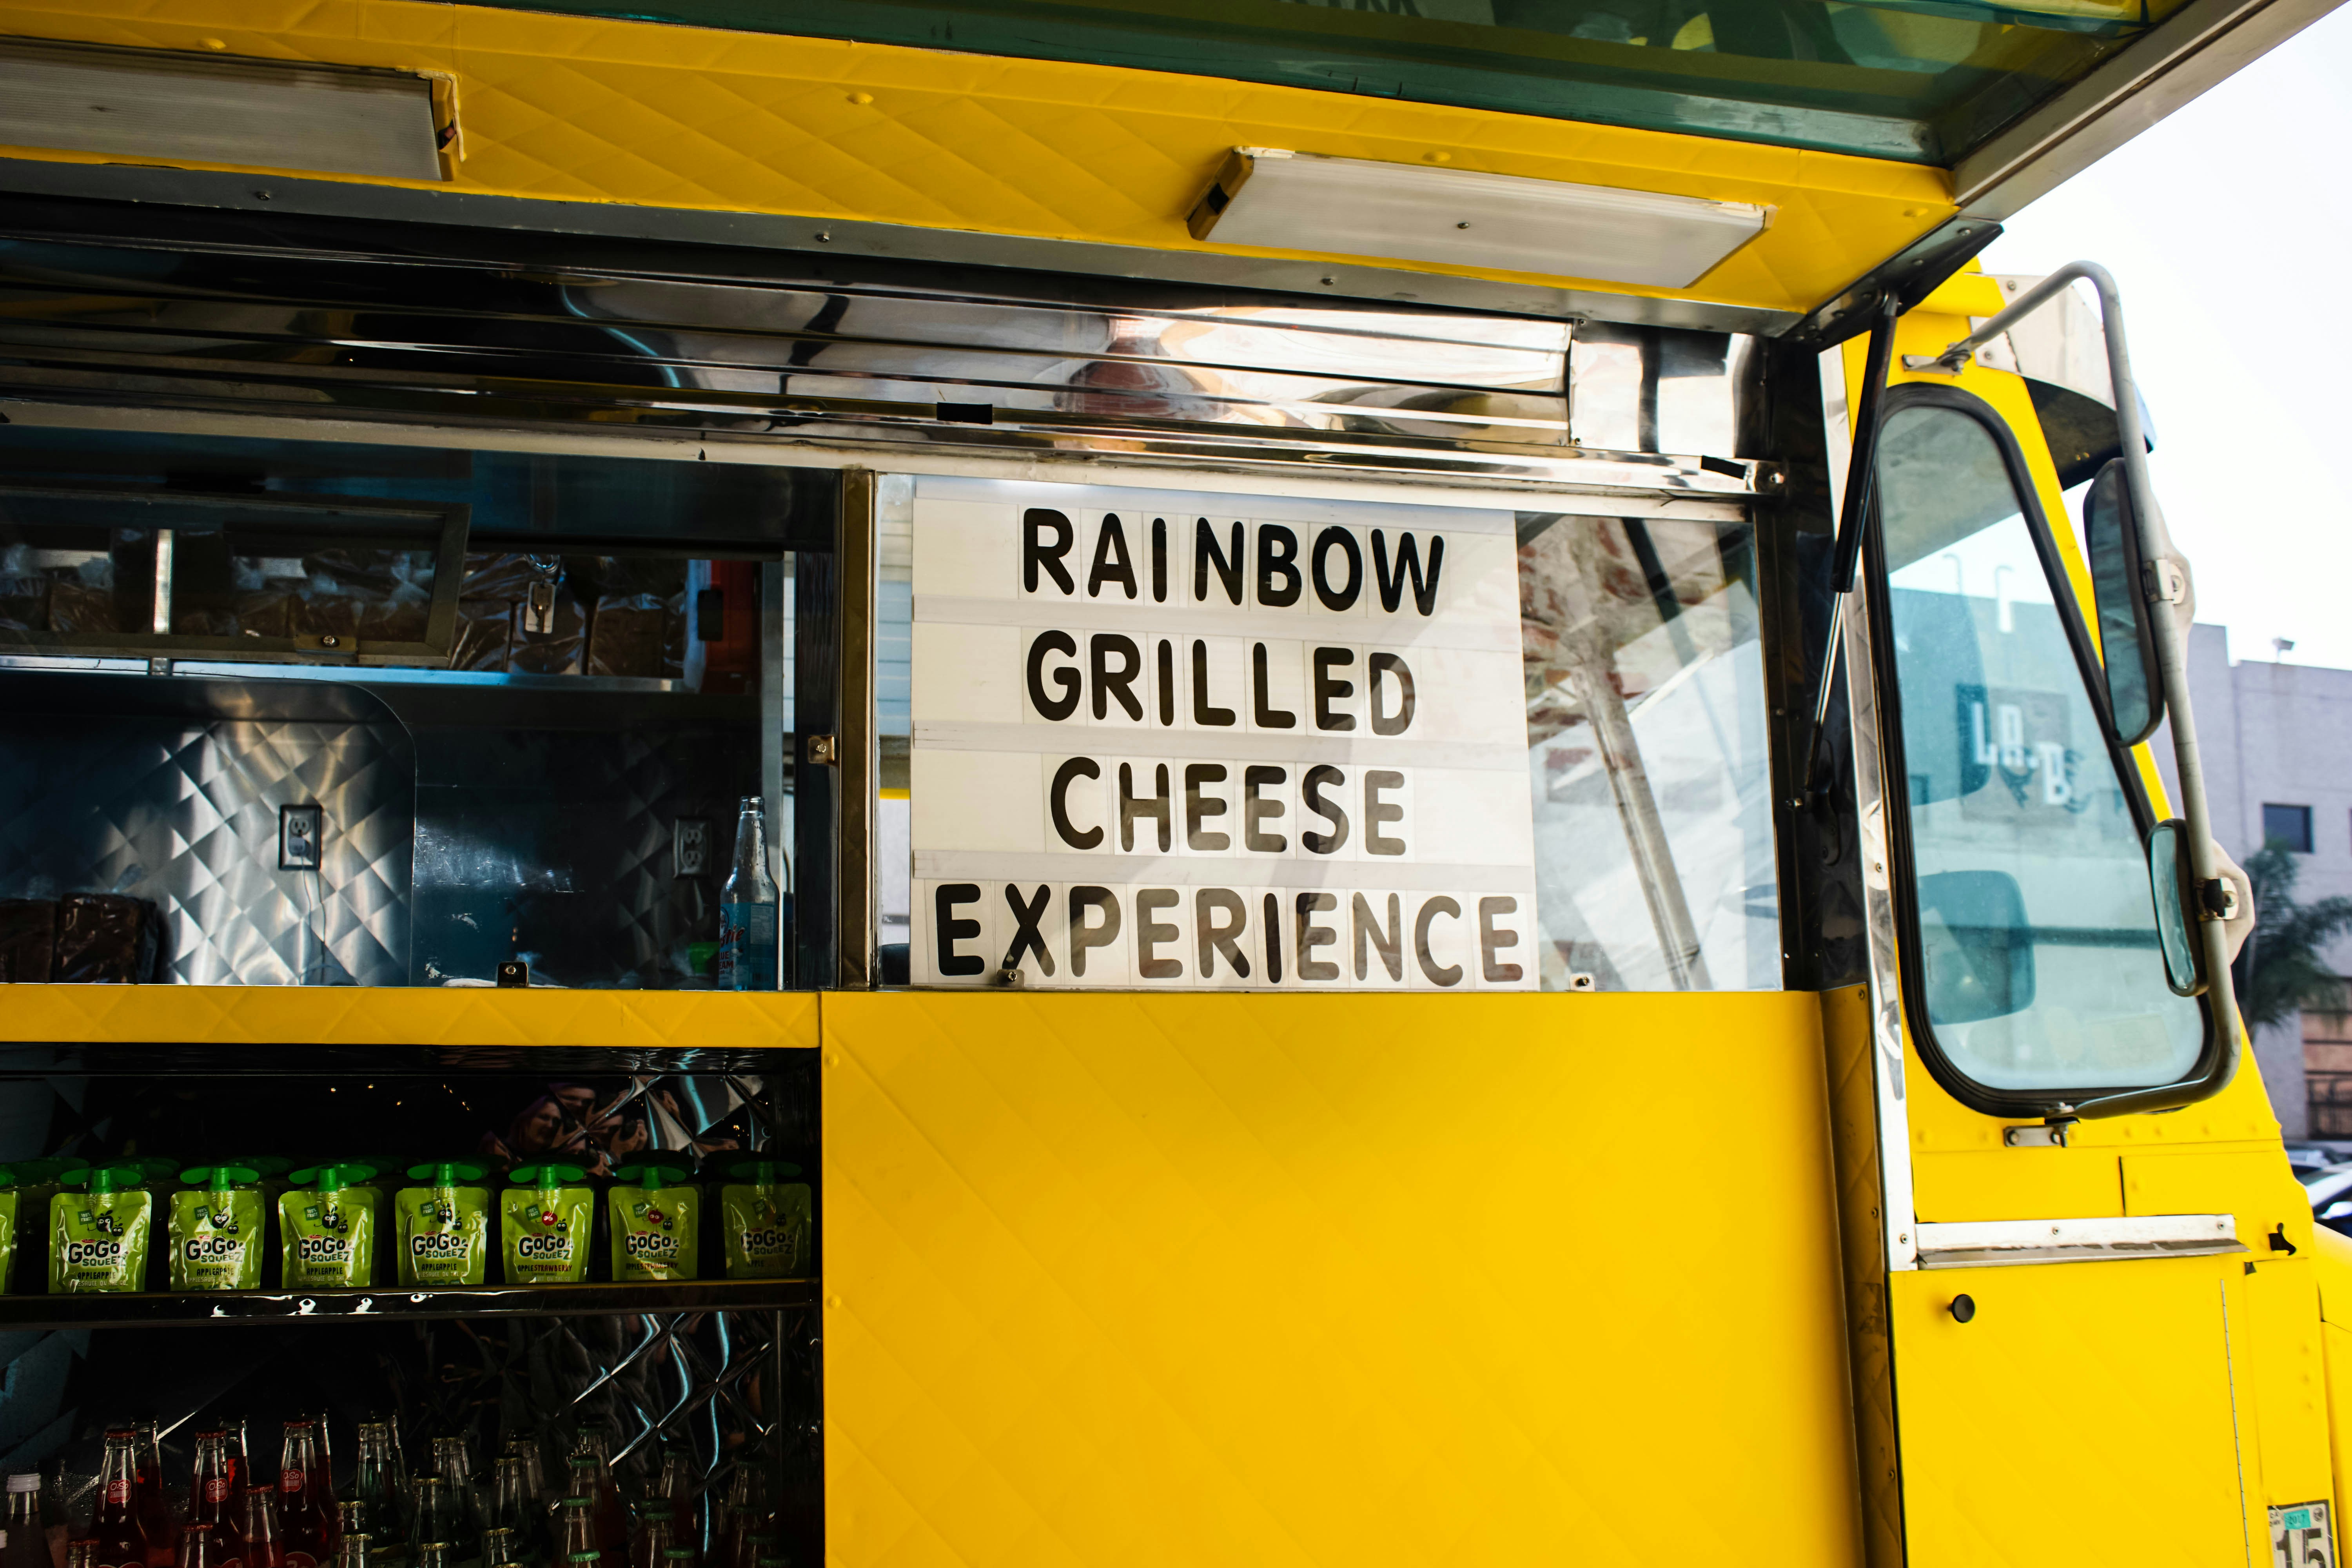 Happy place serves these unique rainbow grilled cheeses, I just like their food truck.